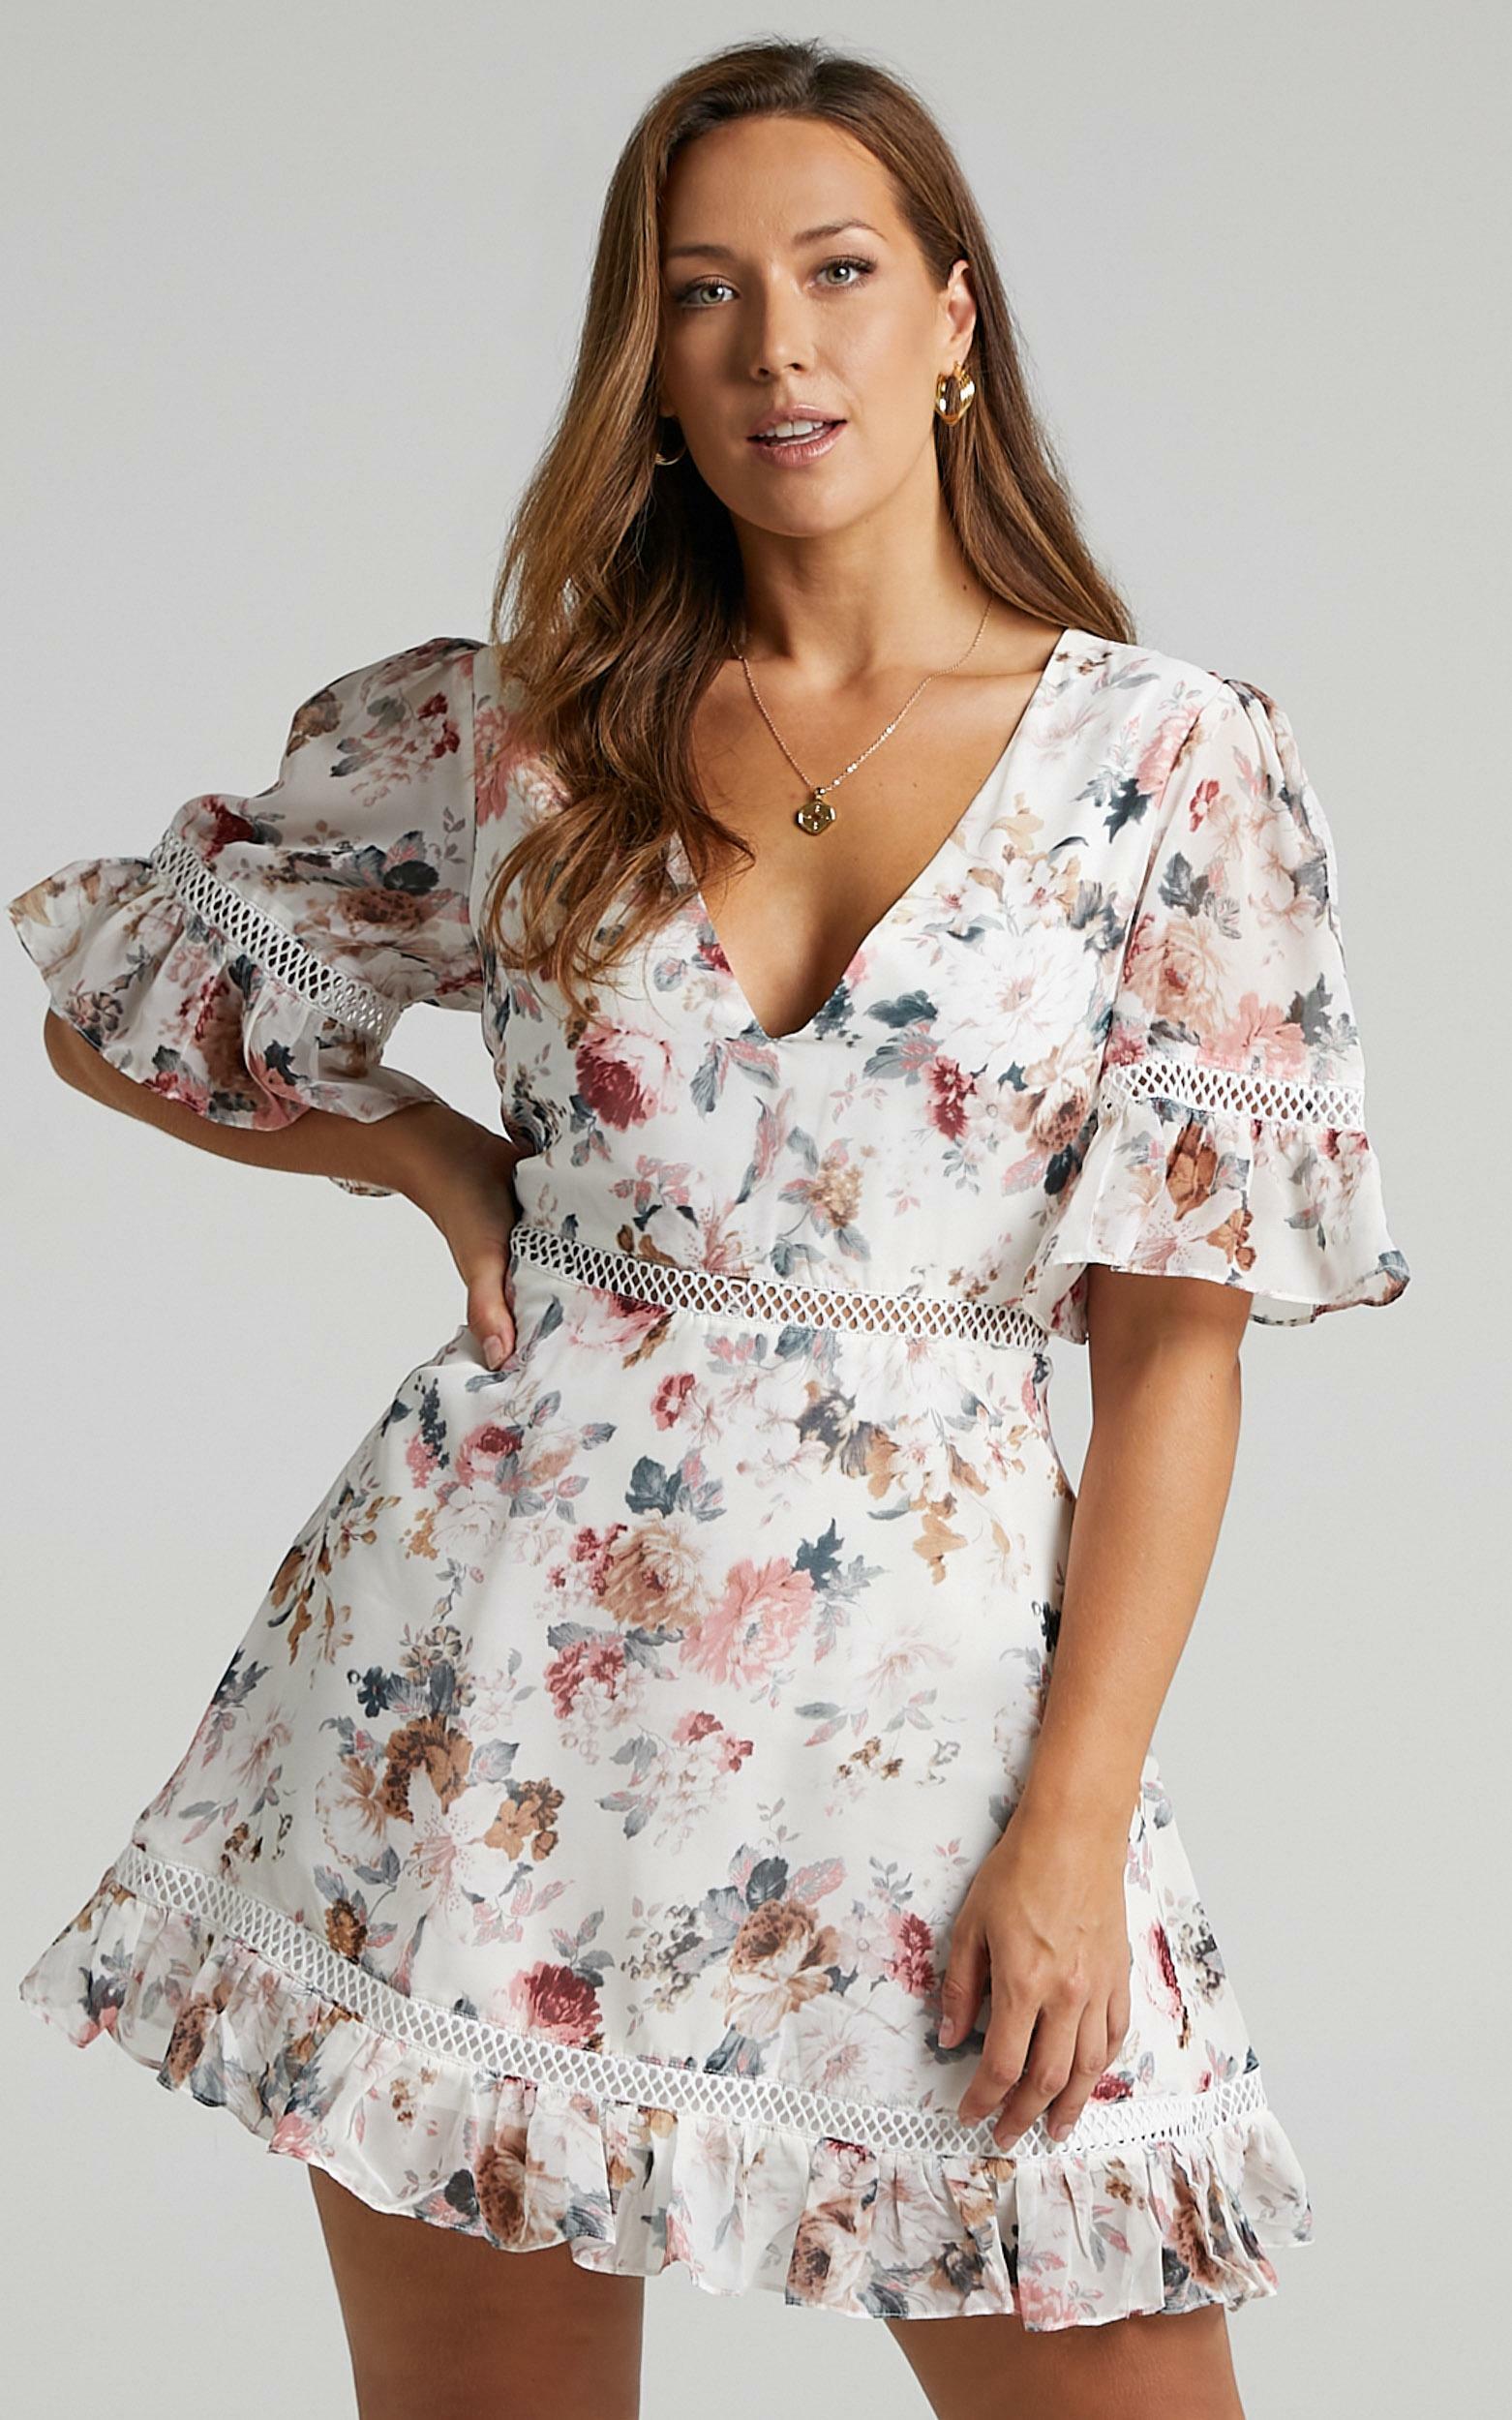 My Darkest Night Dress in White Floral - 20, WHT3, hi-res image number null